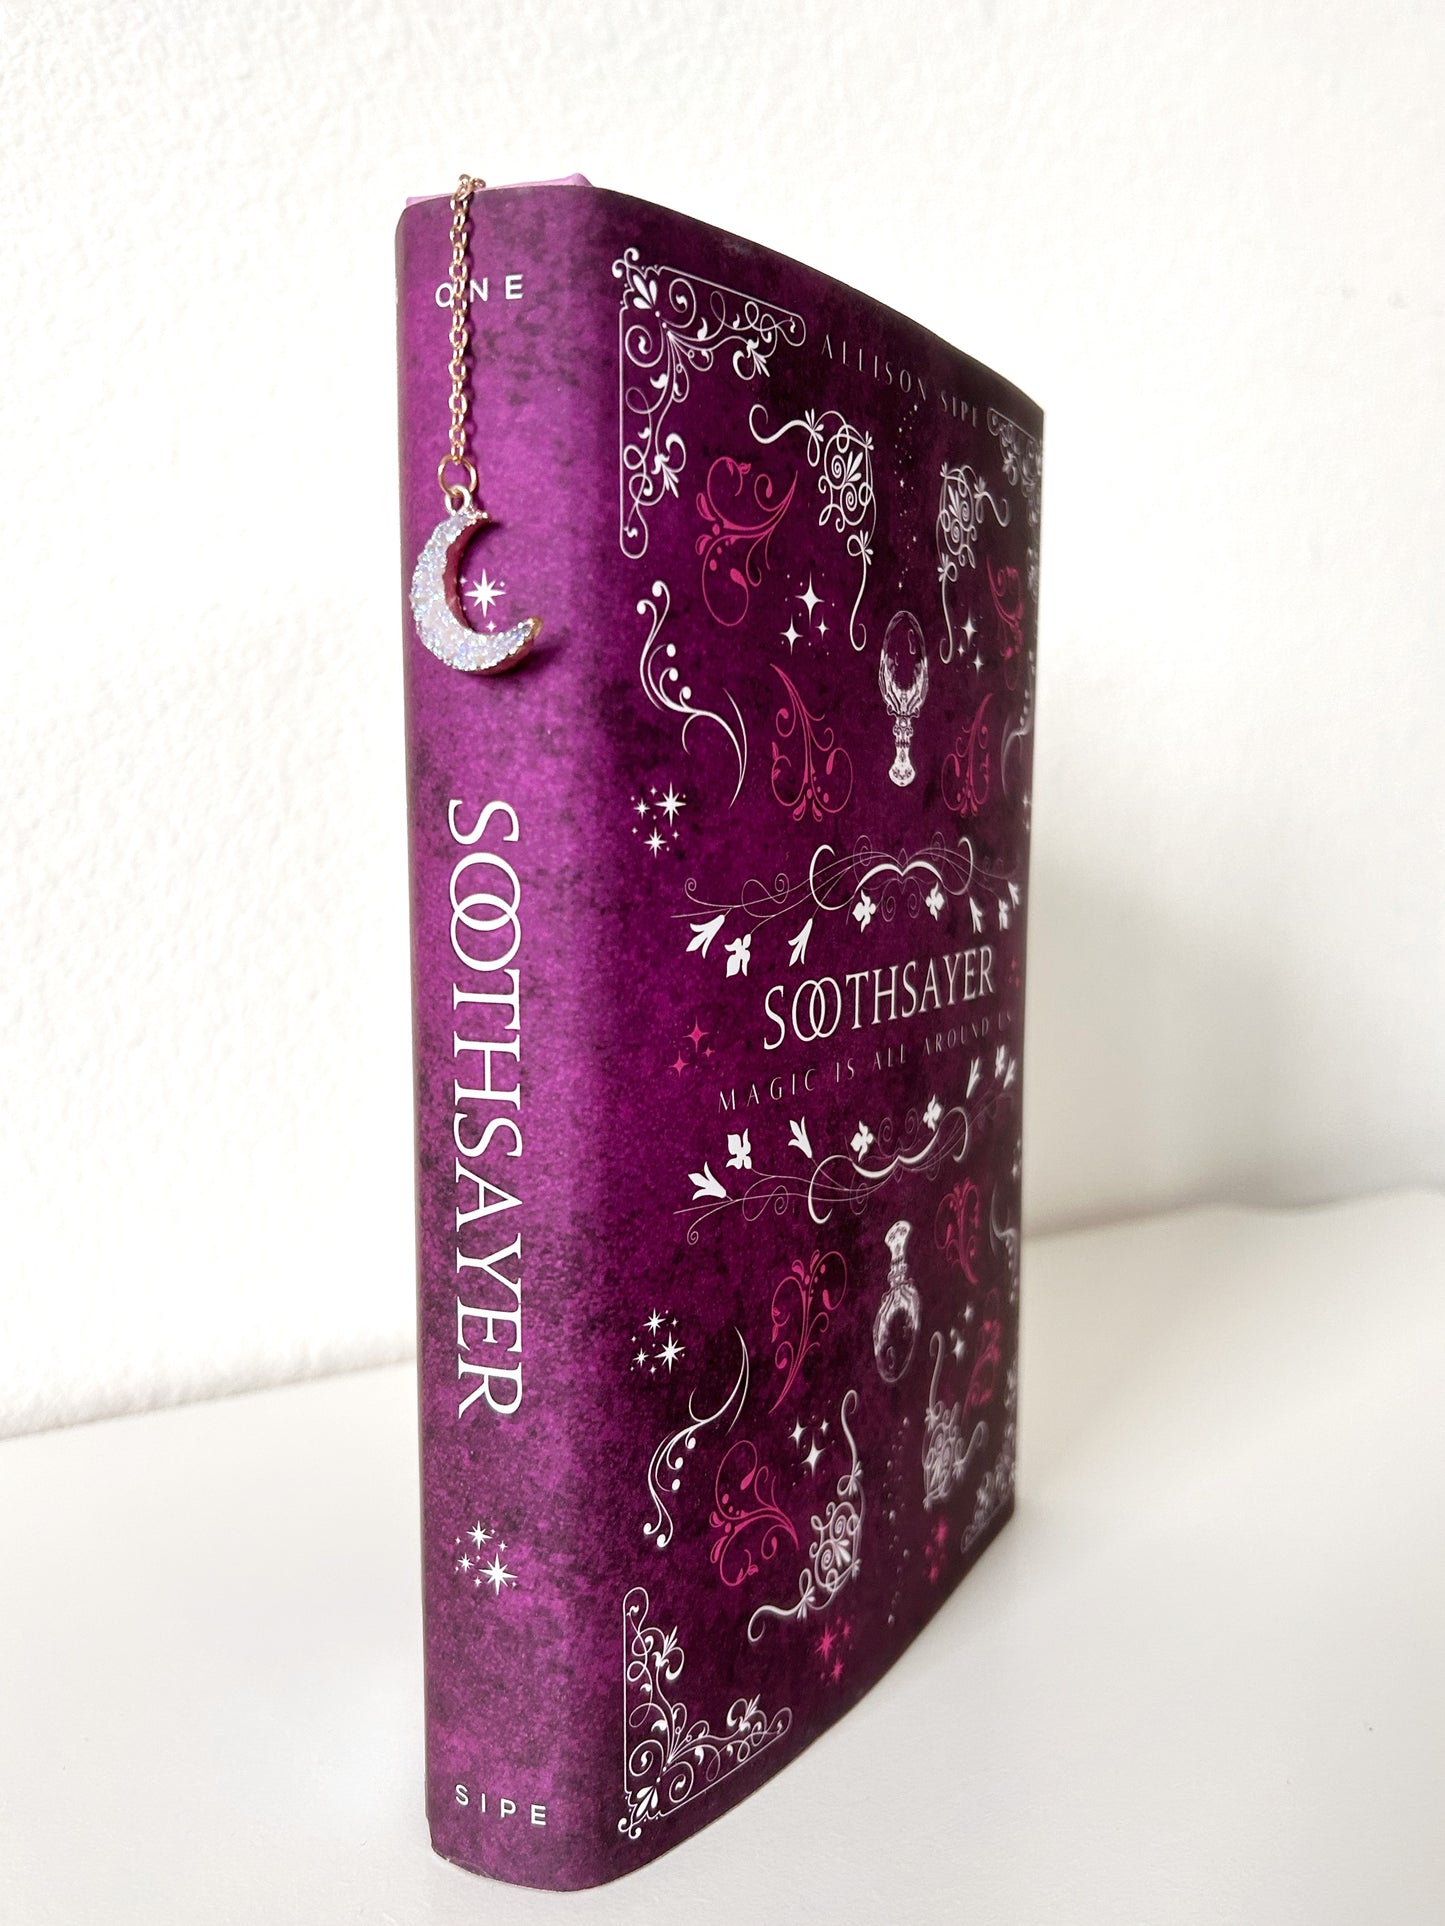 Soothsayer Hardcover Book Box